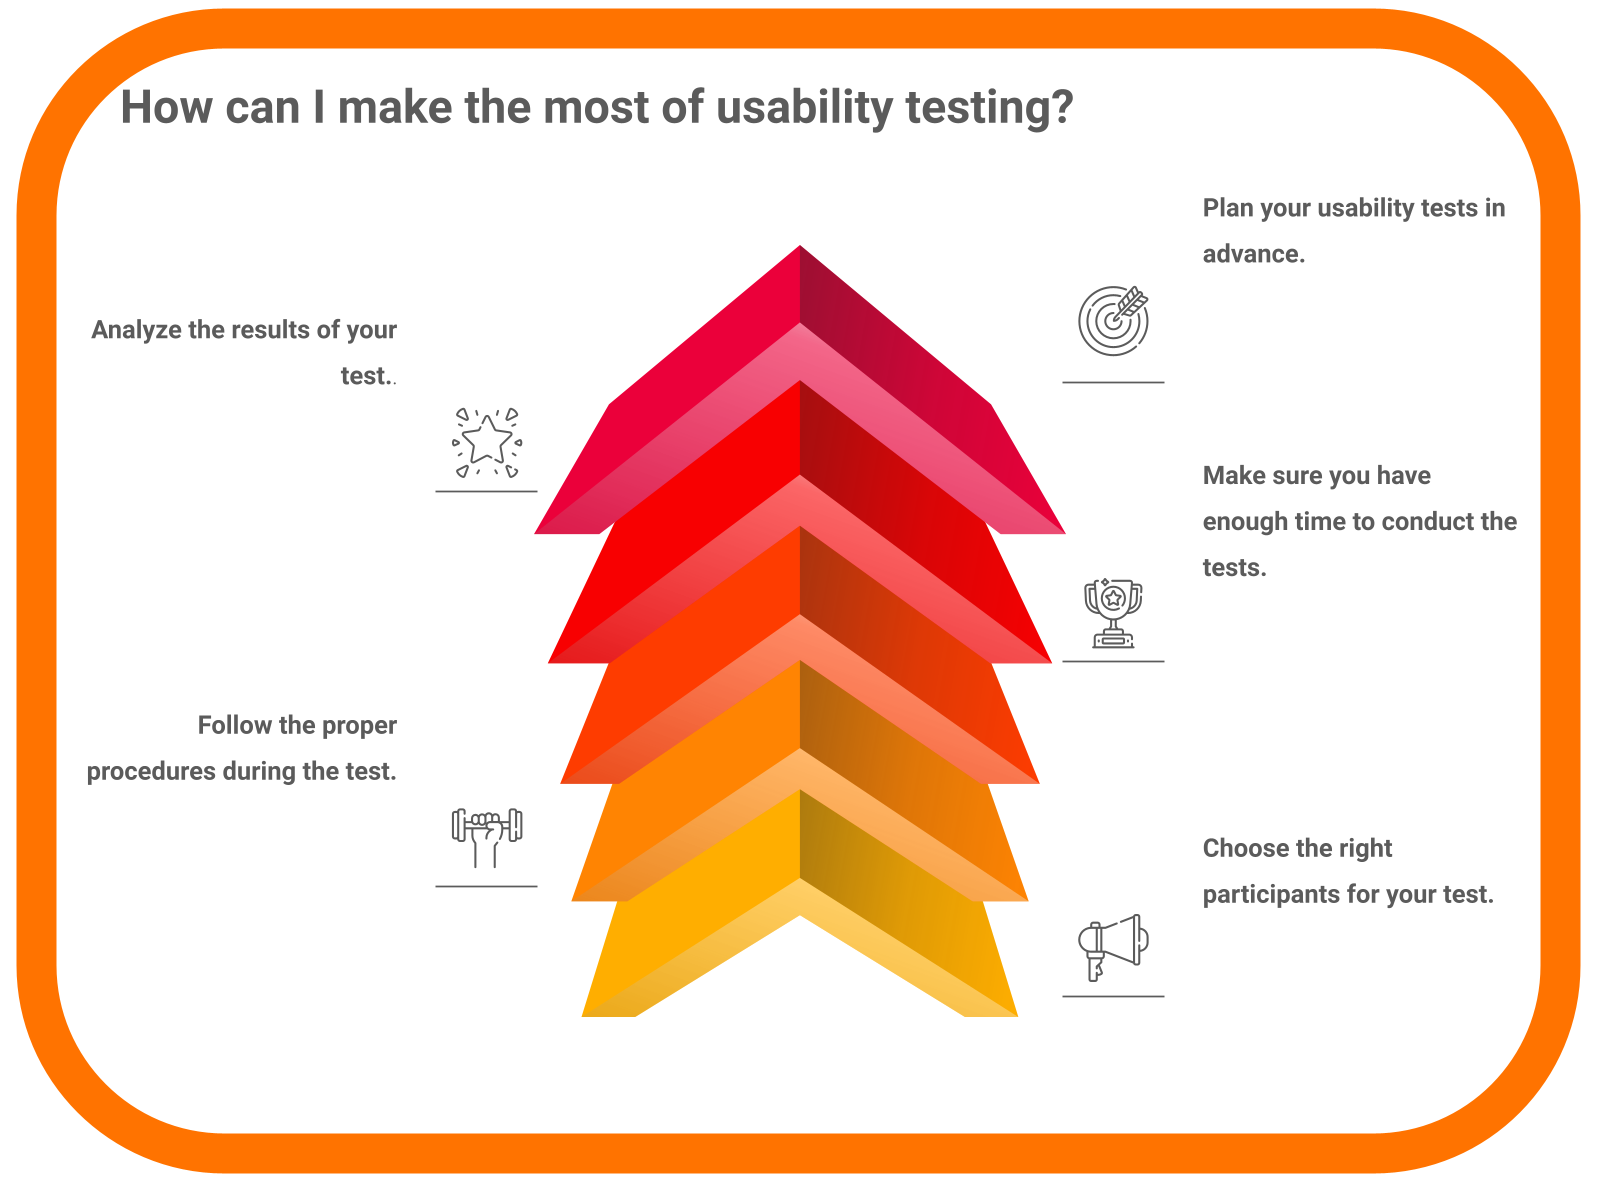 How can I make the most of usability testing to improve conversion rate?